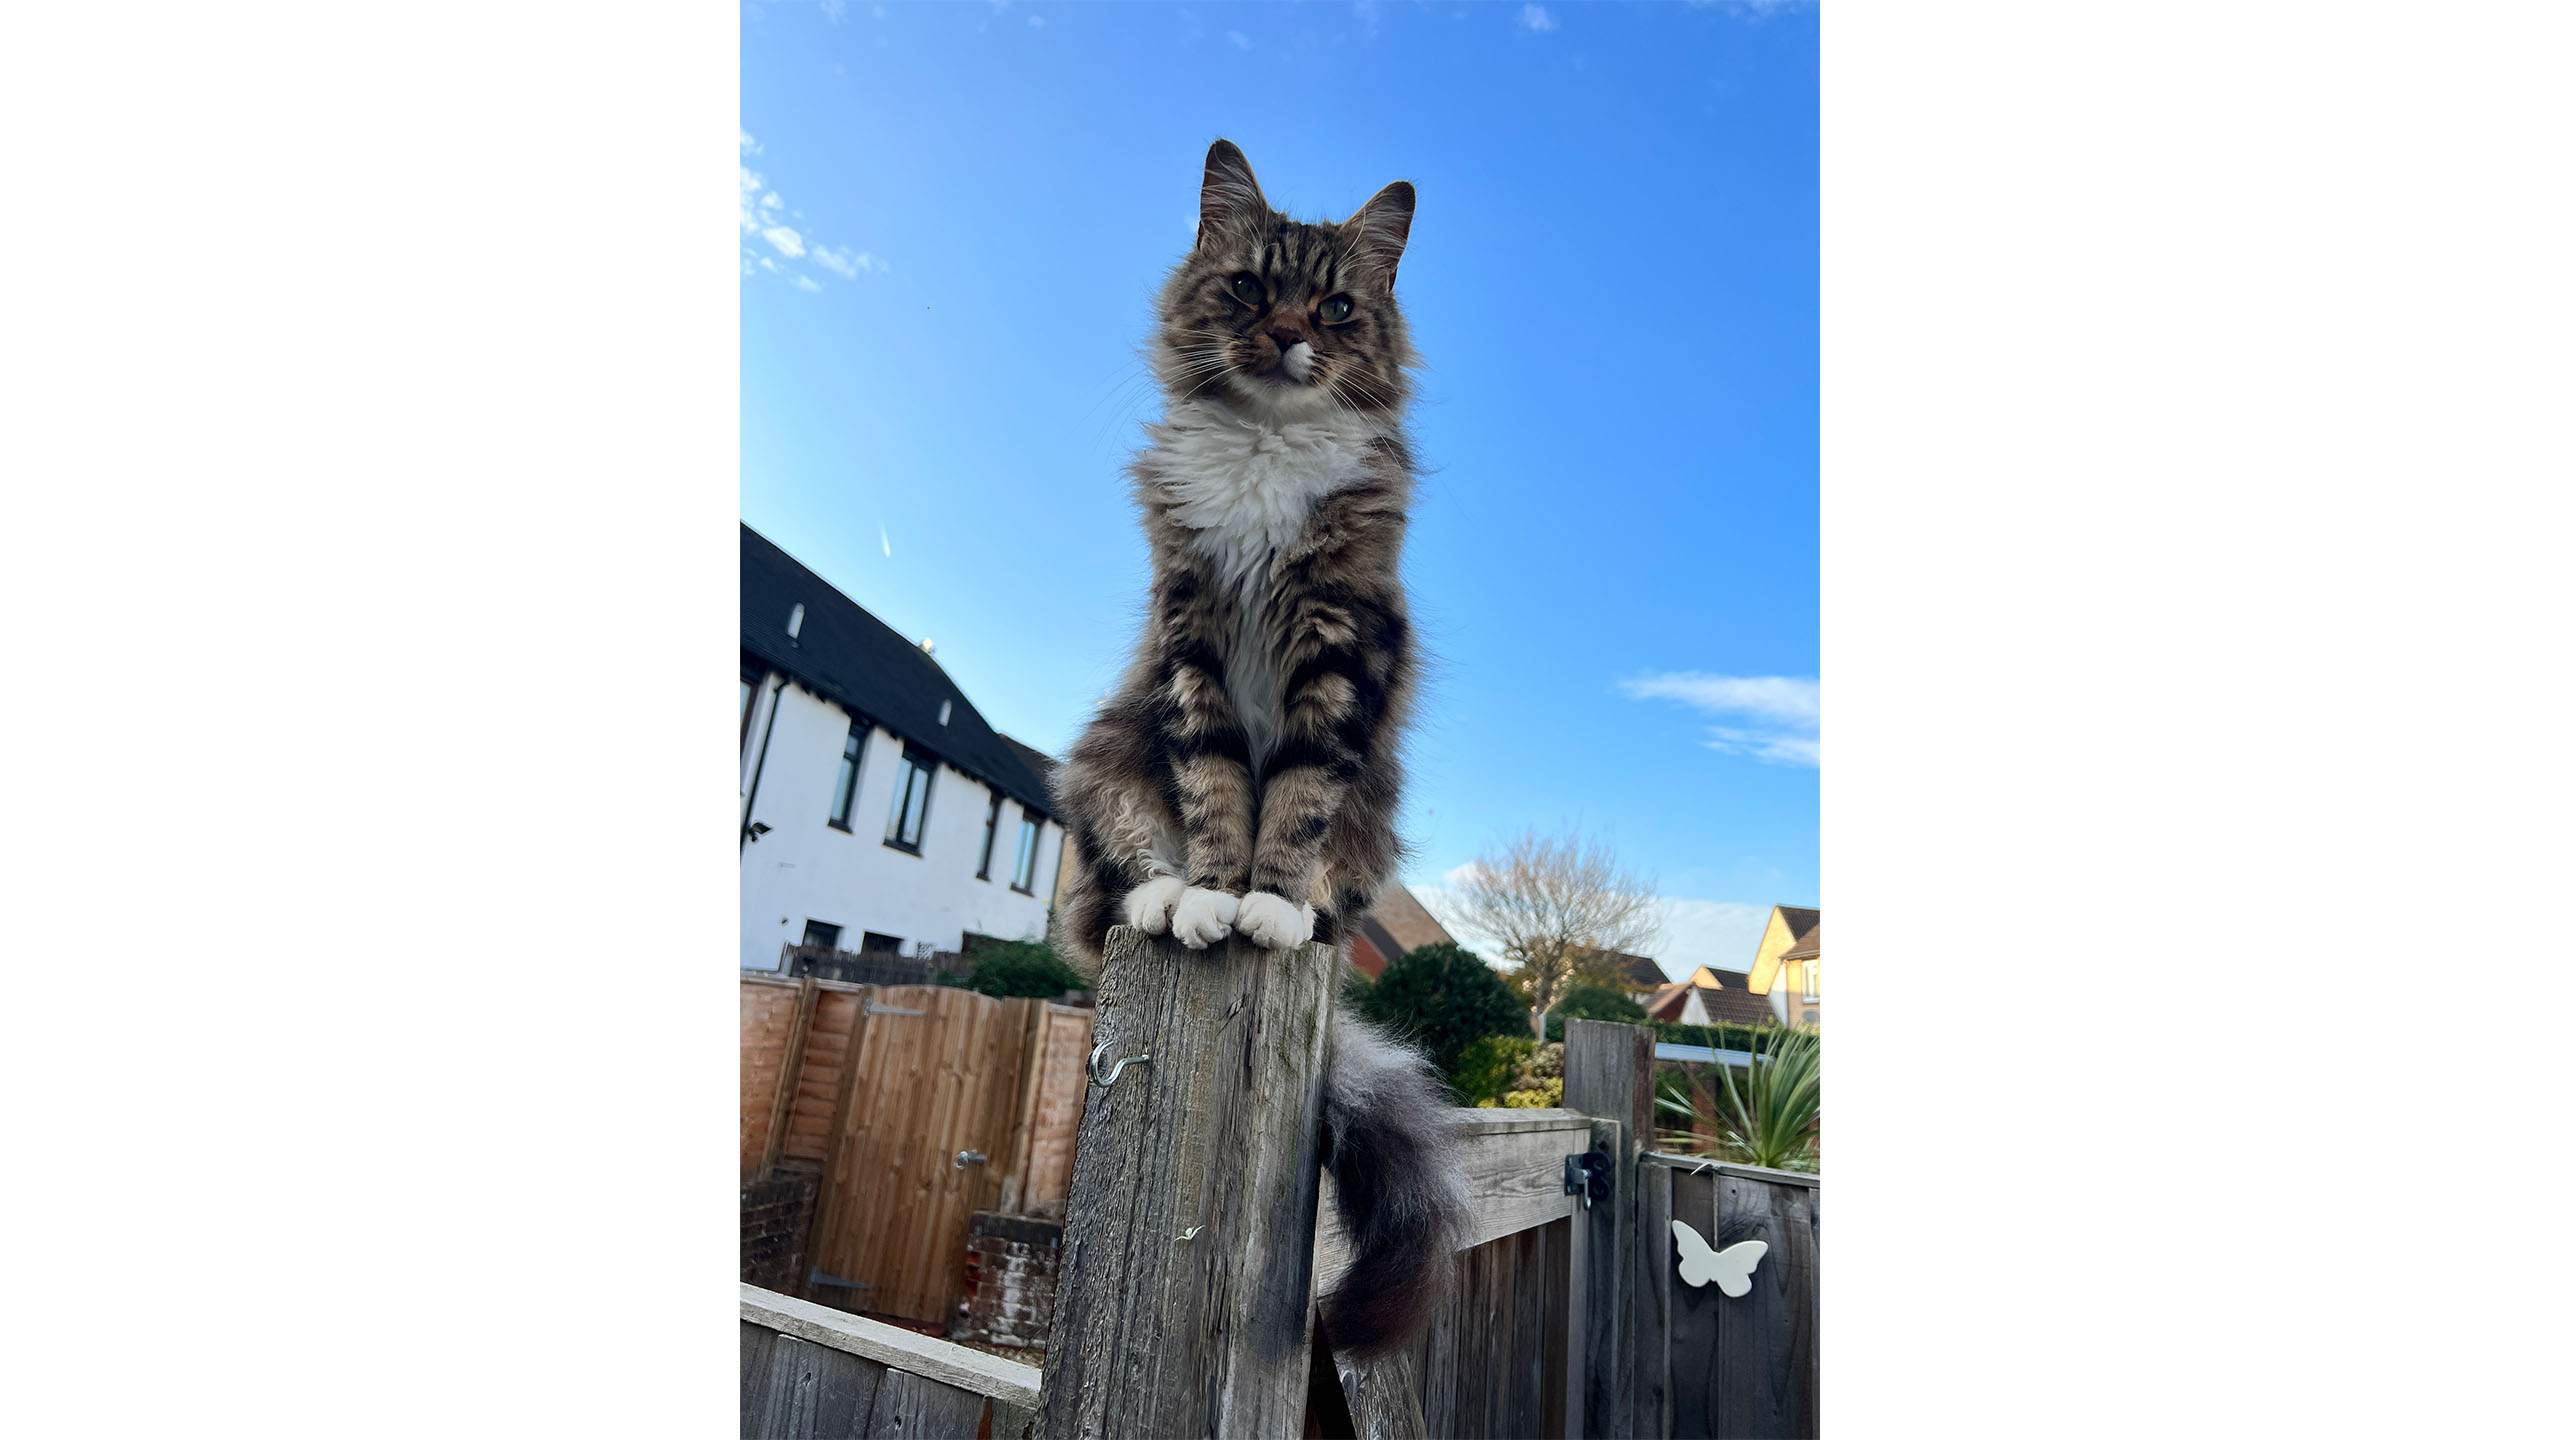 Cat perched on fence